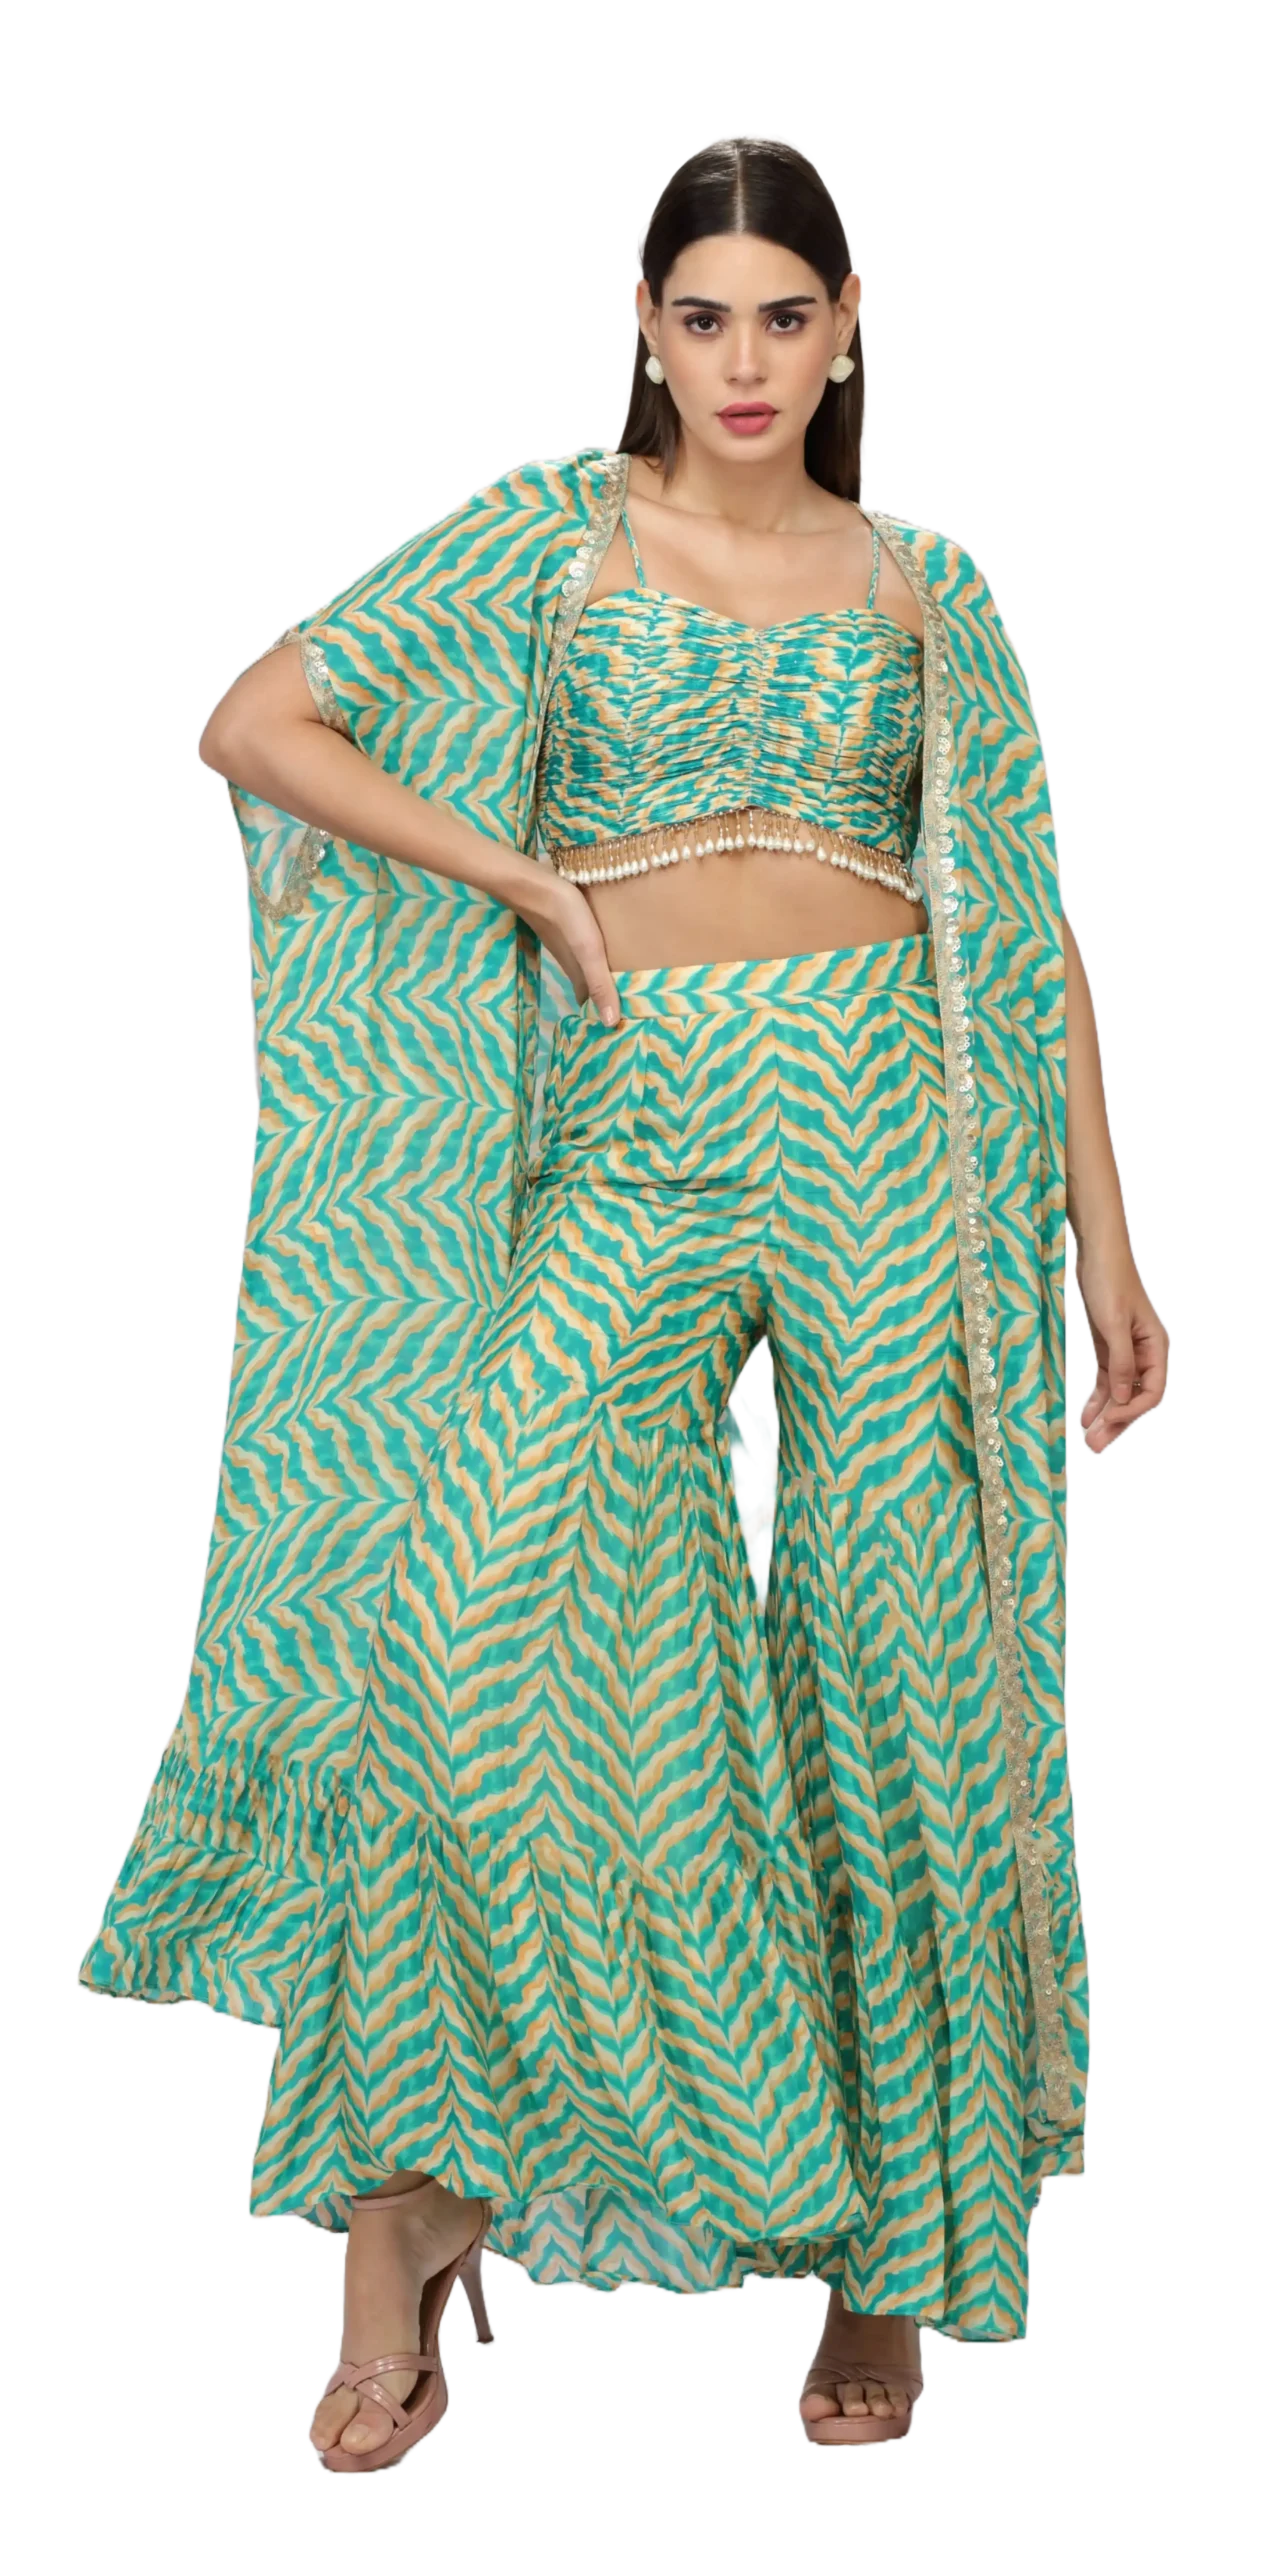 Wholesale Womens Clothing Manufacturers and supplier India - Esika World